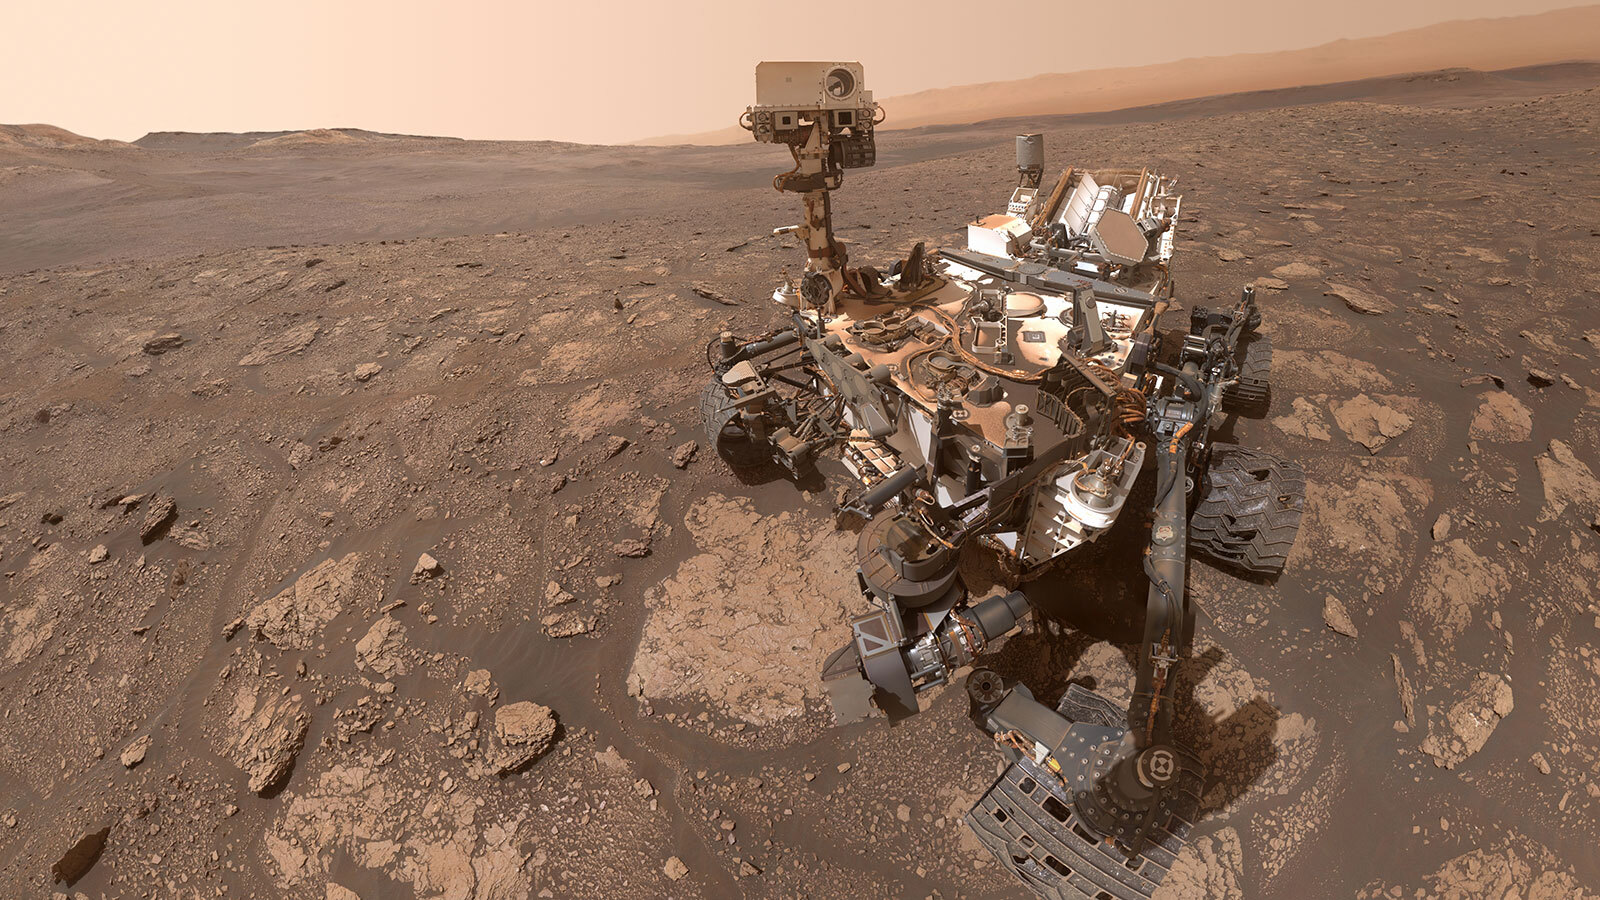 NASA Curiosity Takes Selfie With 'Mary Annining' On Red Planet - NASA's Mars Exploration Program